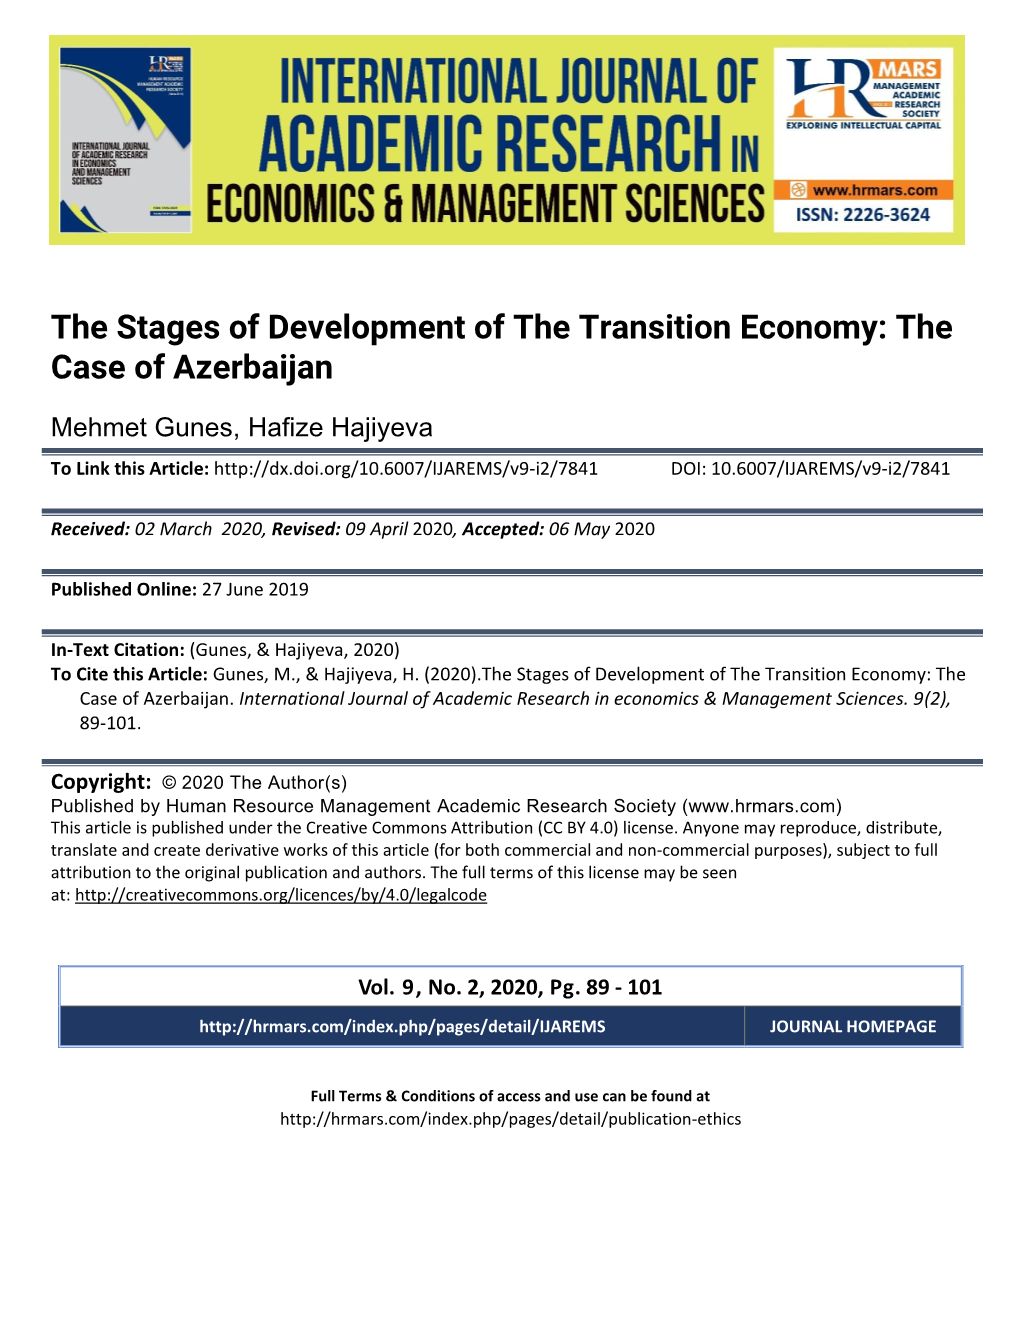 The Stages of Development of the Transition Economy: the Case of Azerbaijan